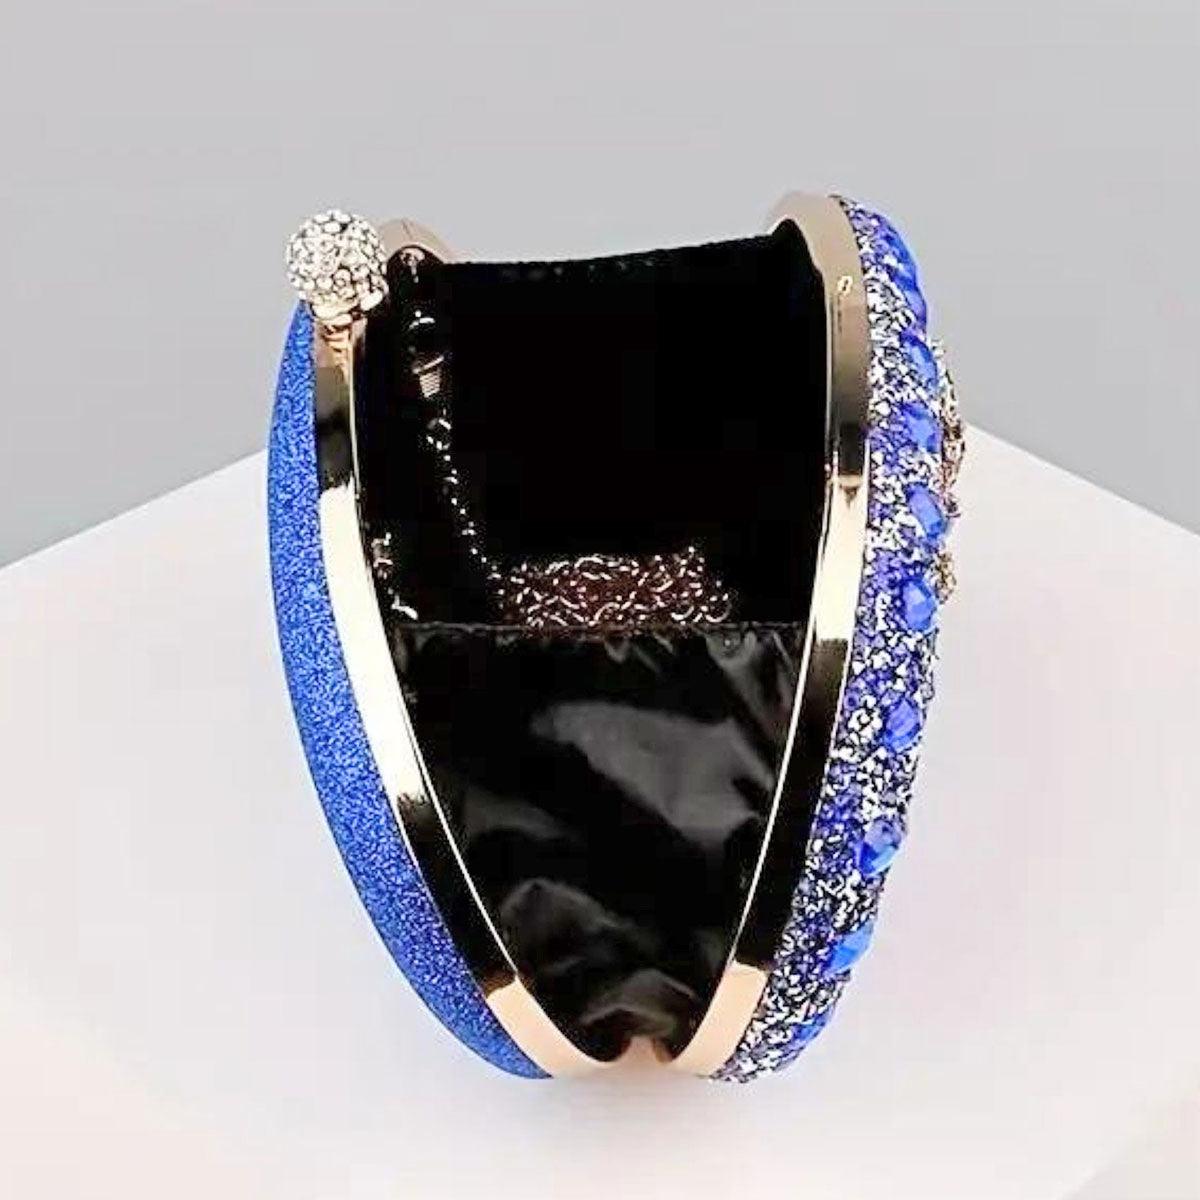 Get Noticed with Our Stunning Clutch Blue Crystal Bag